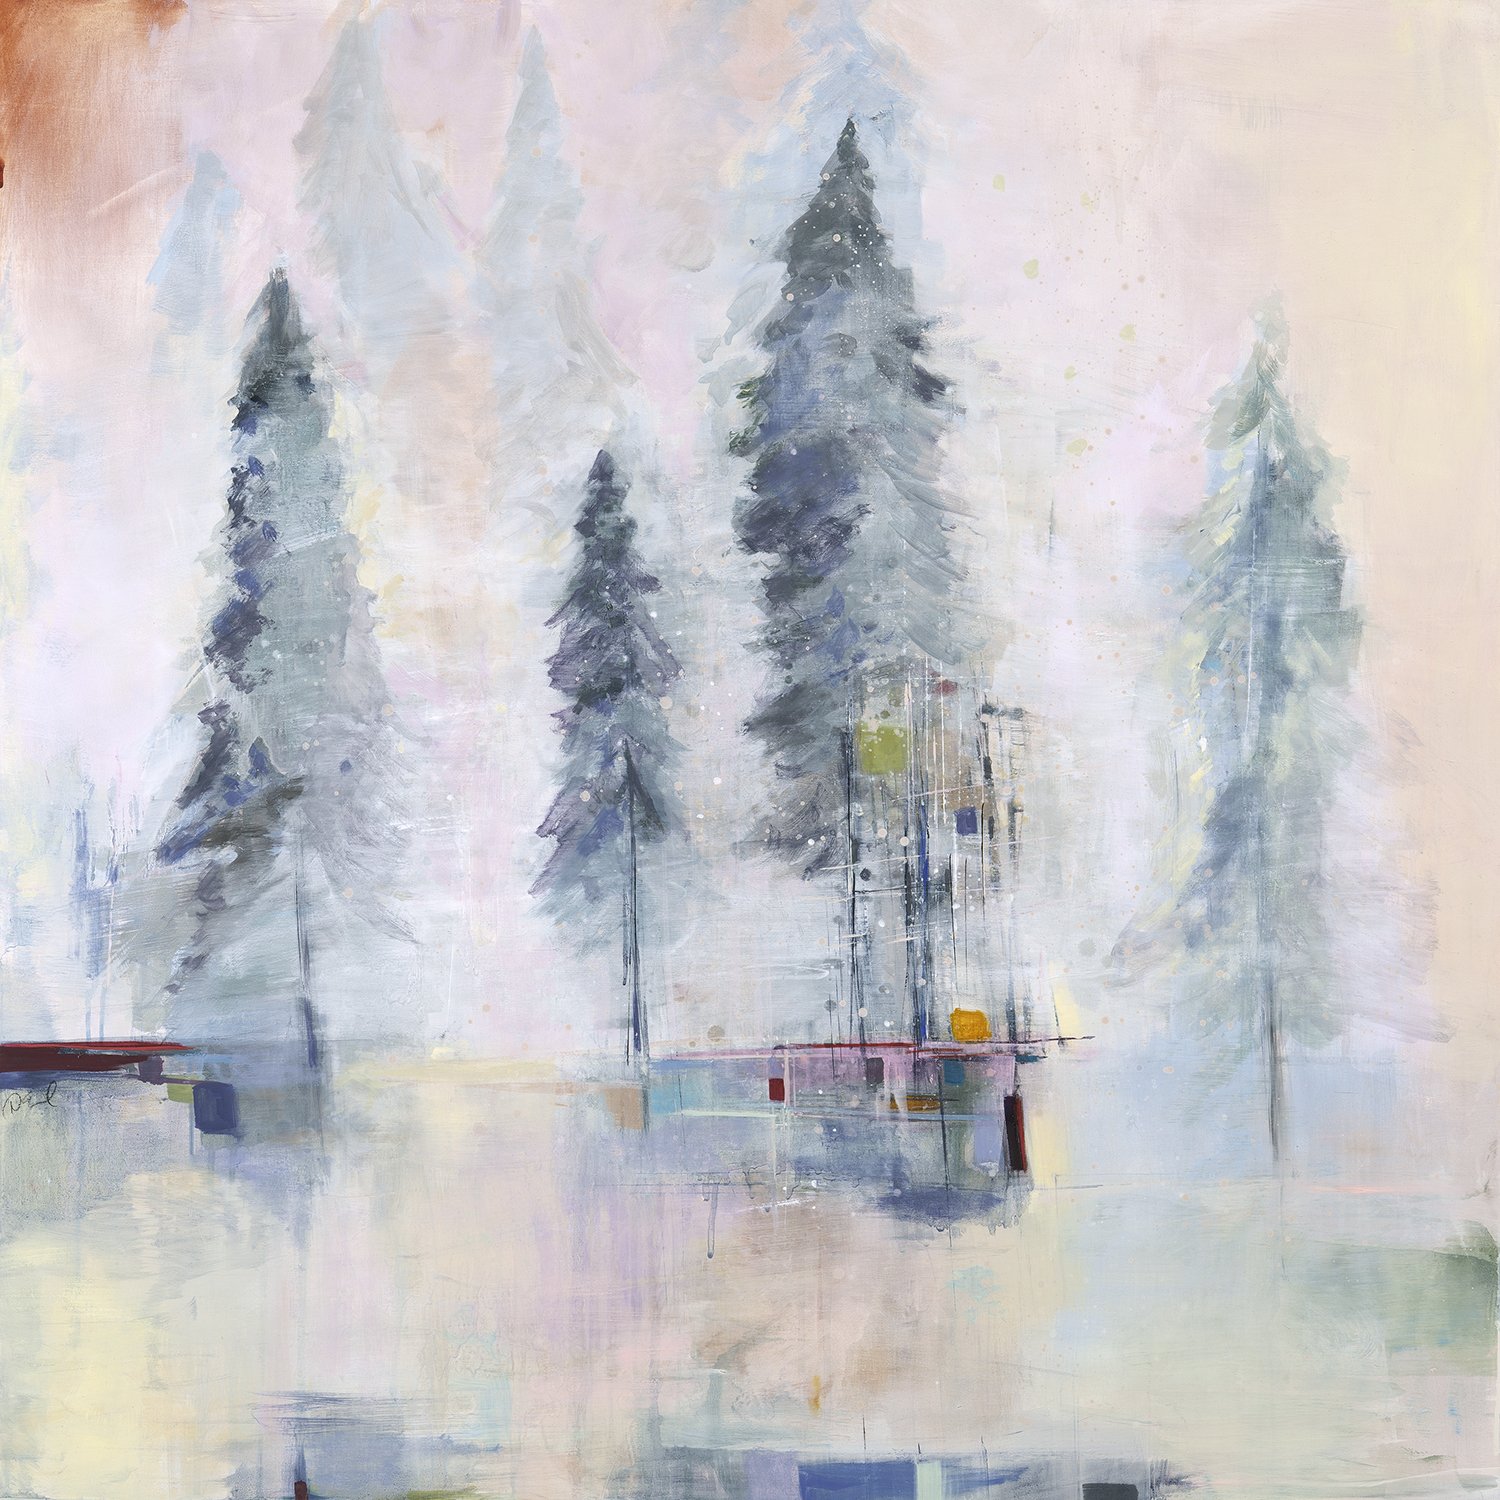   Into the Fog  Oil on wood 36x36 inches SOLD 